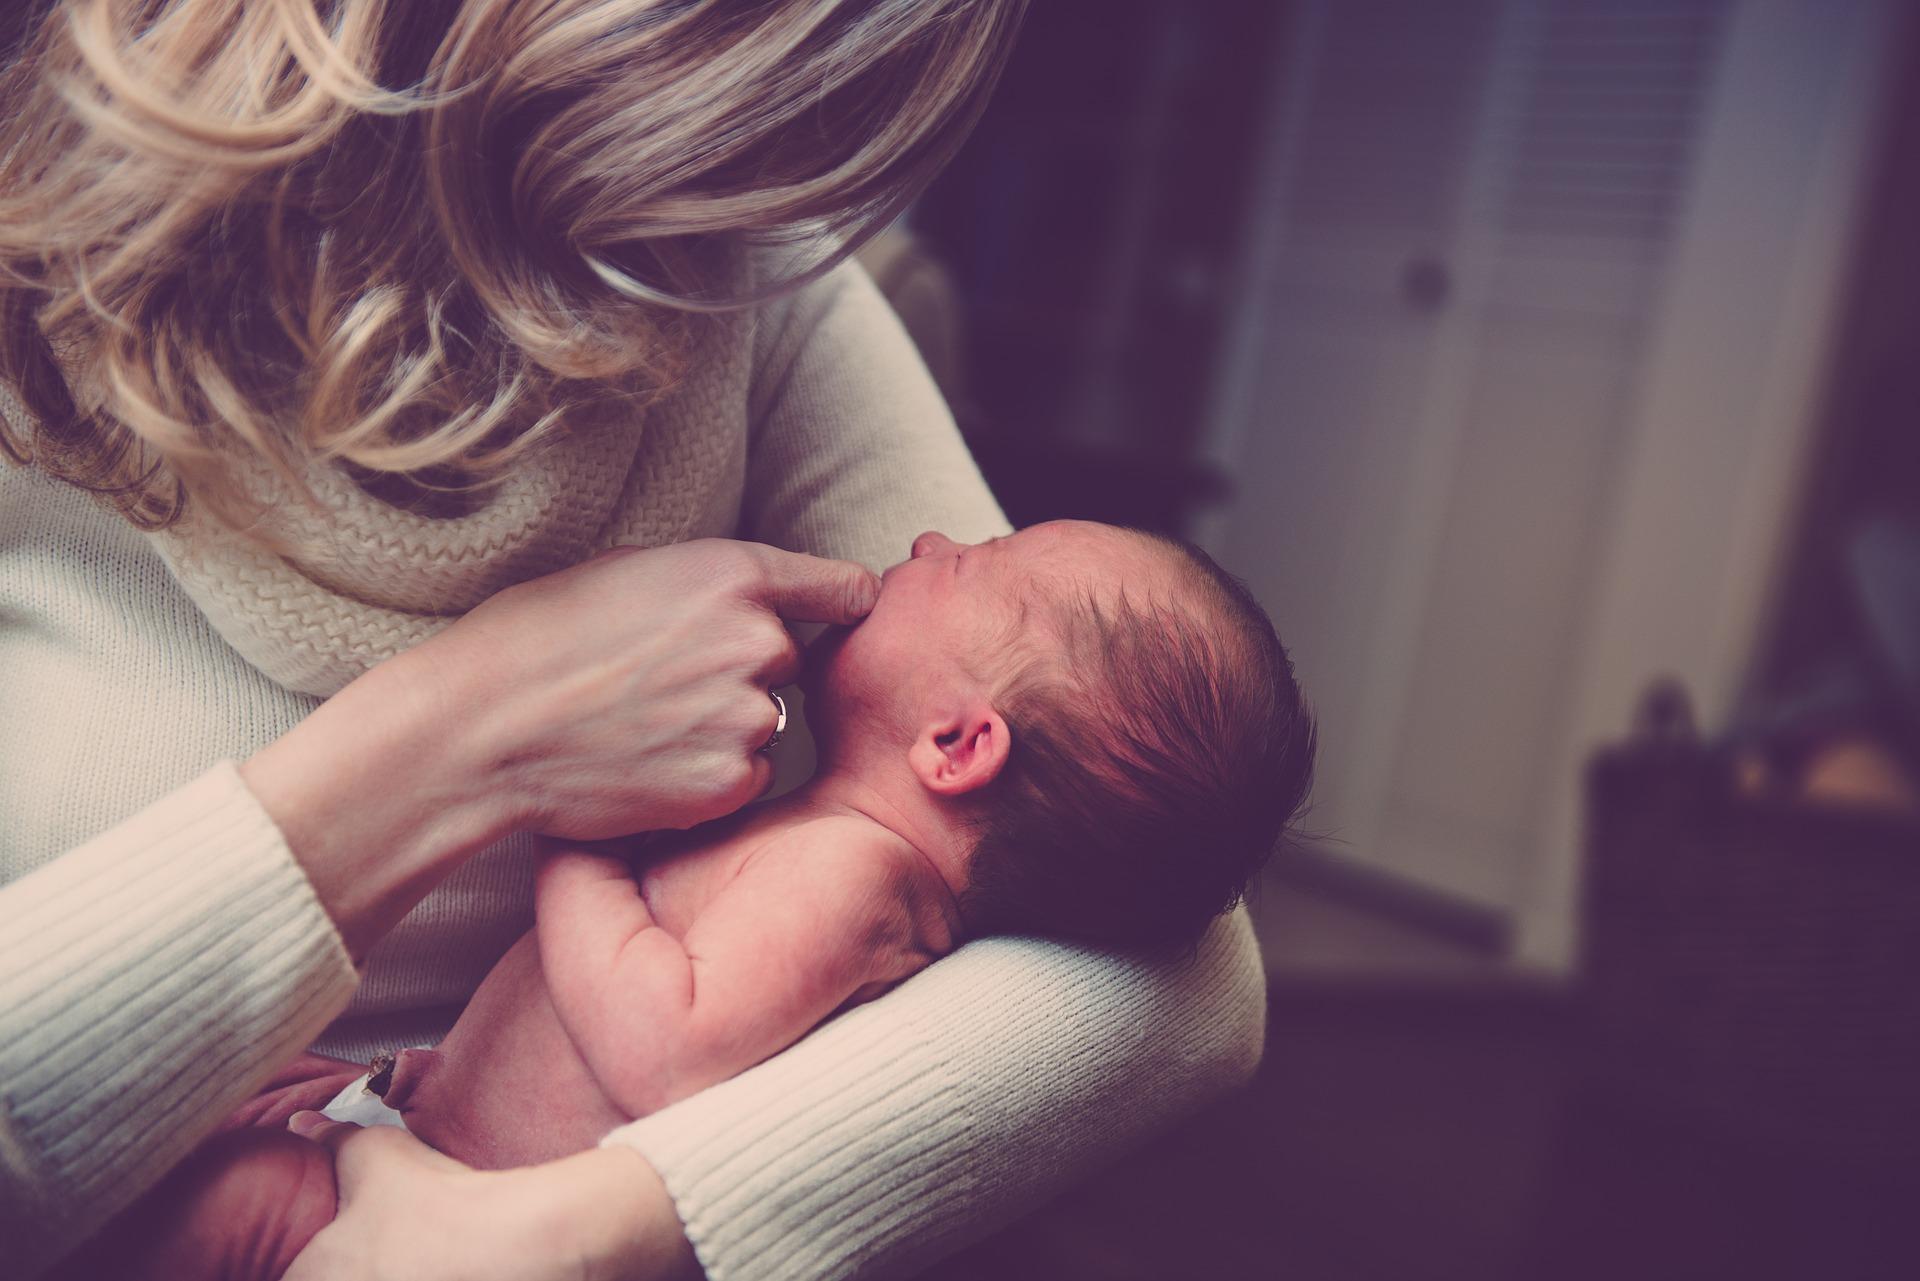 Some women with postpartum psychosis report experiencing depression and a “dark force” within them that takes over and compels them to hurt the baby, Northwestern Medicine psychiatrist Dr. Katherine Wisner said.